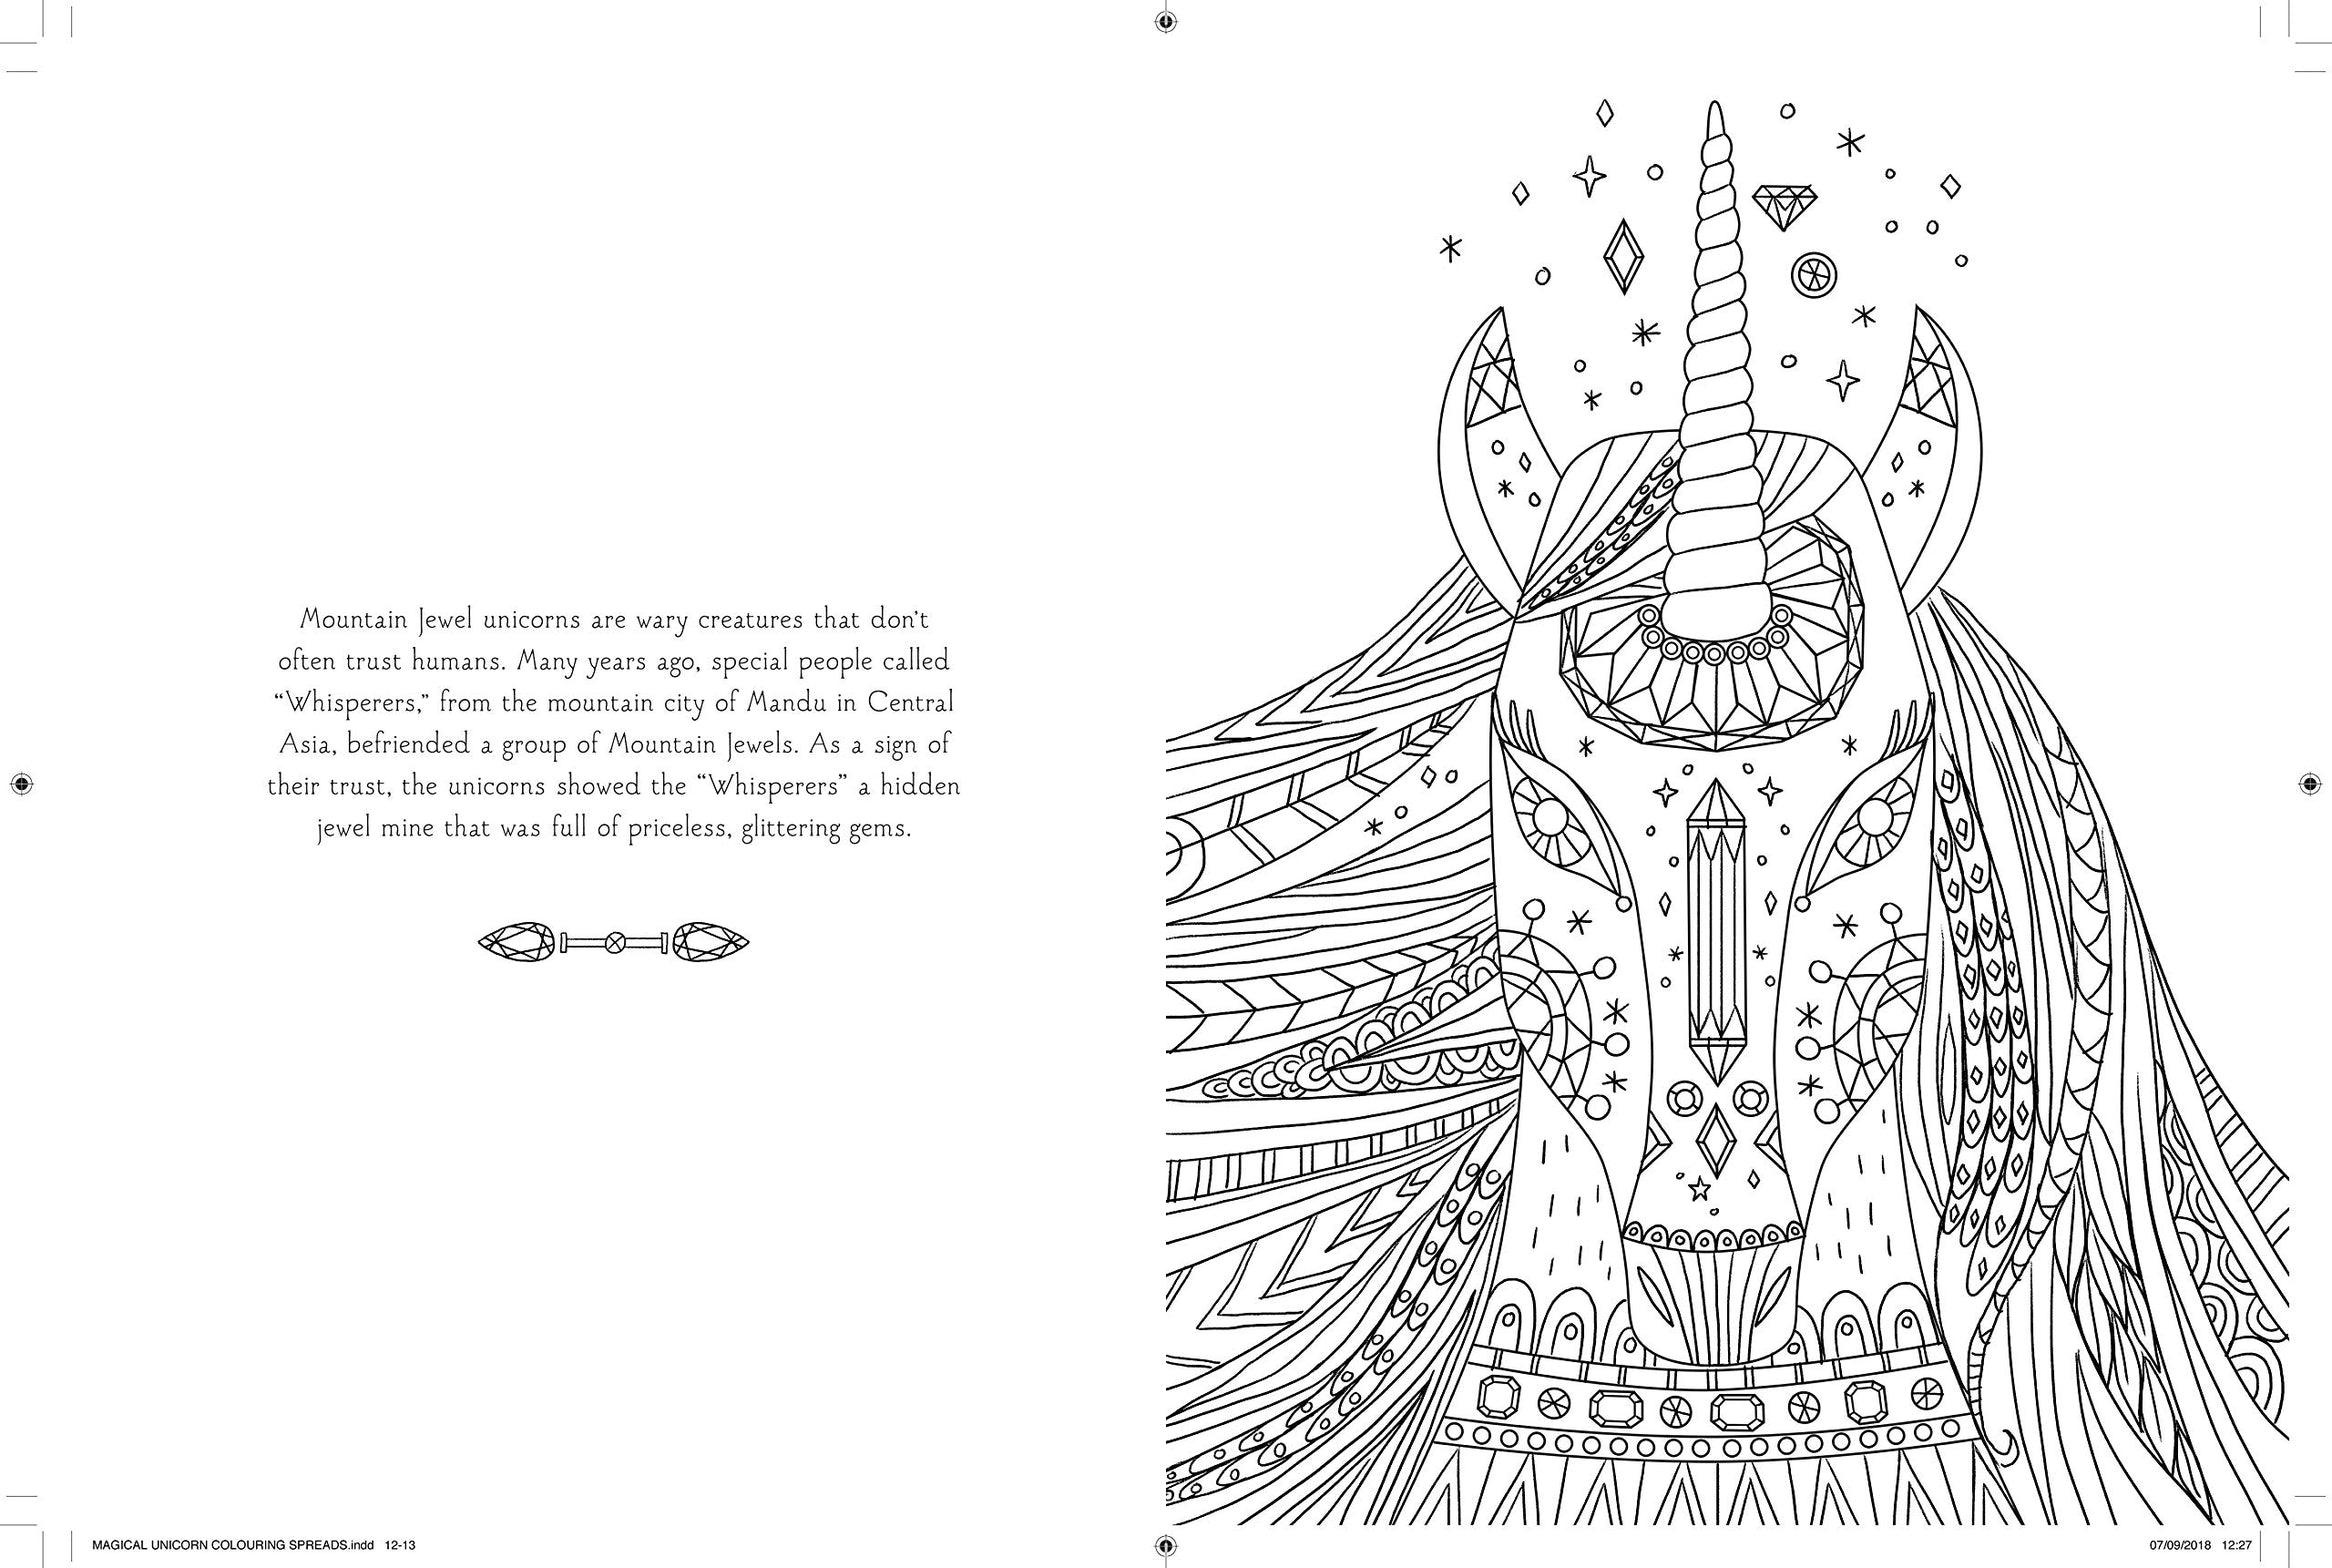 Magical Unicorn Society Official Coloring Book